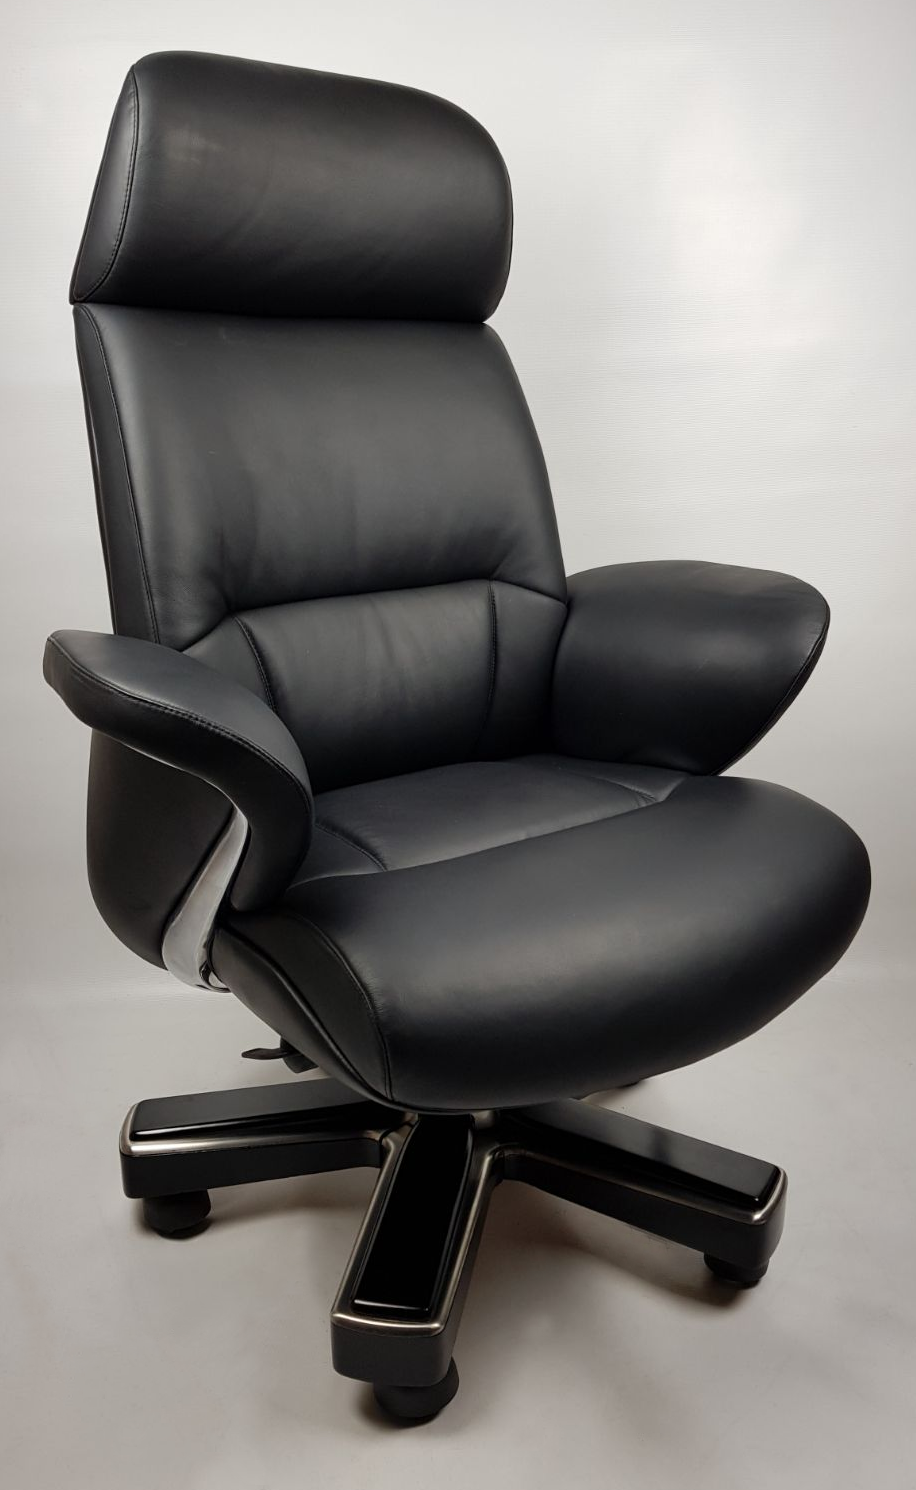 Large Luxury Executive Office Chair with Genuine Black Leather - YS1605A UK